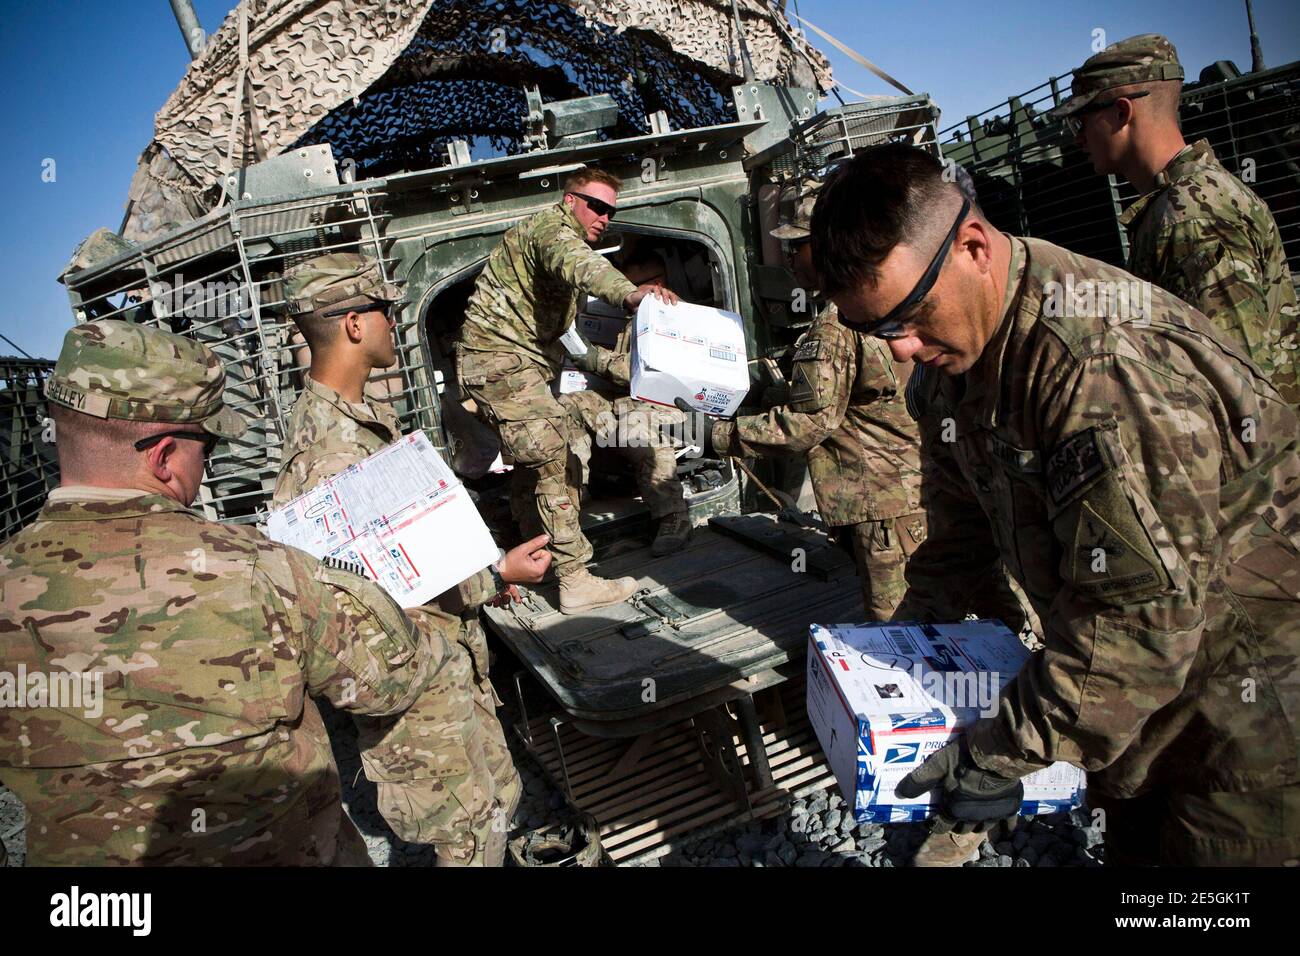 Soldiers of 1st Battalion, 36th Infantry Regiment, sort mail in command  outpost Hutal, Maywand District, Kandahar Province, Afghanistan, January  17, 2013. REUTERS/Andrew Burton (AFGHANISTAN - Tags: MILITARY Stock Photo -  Alamy